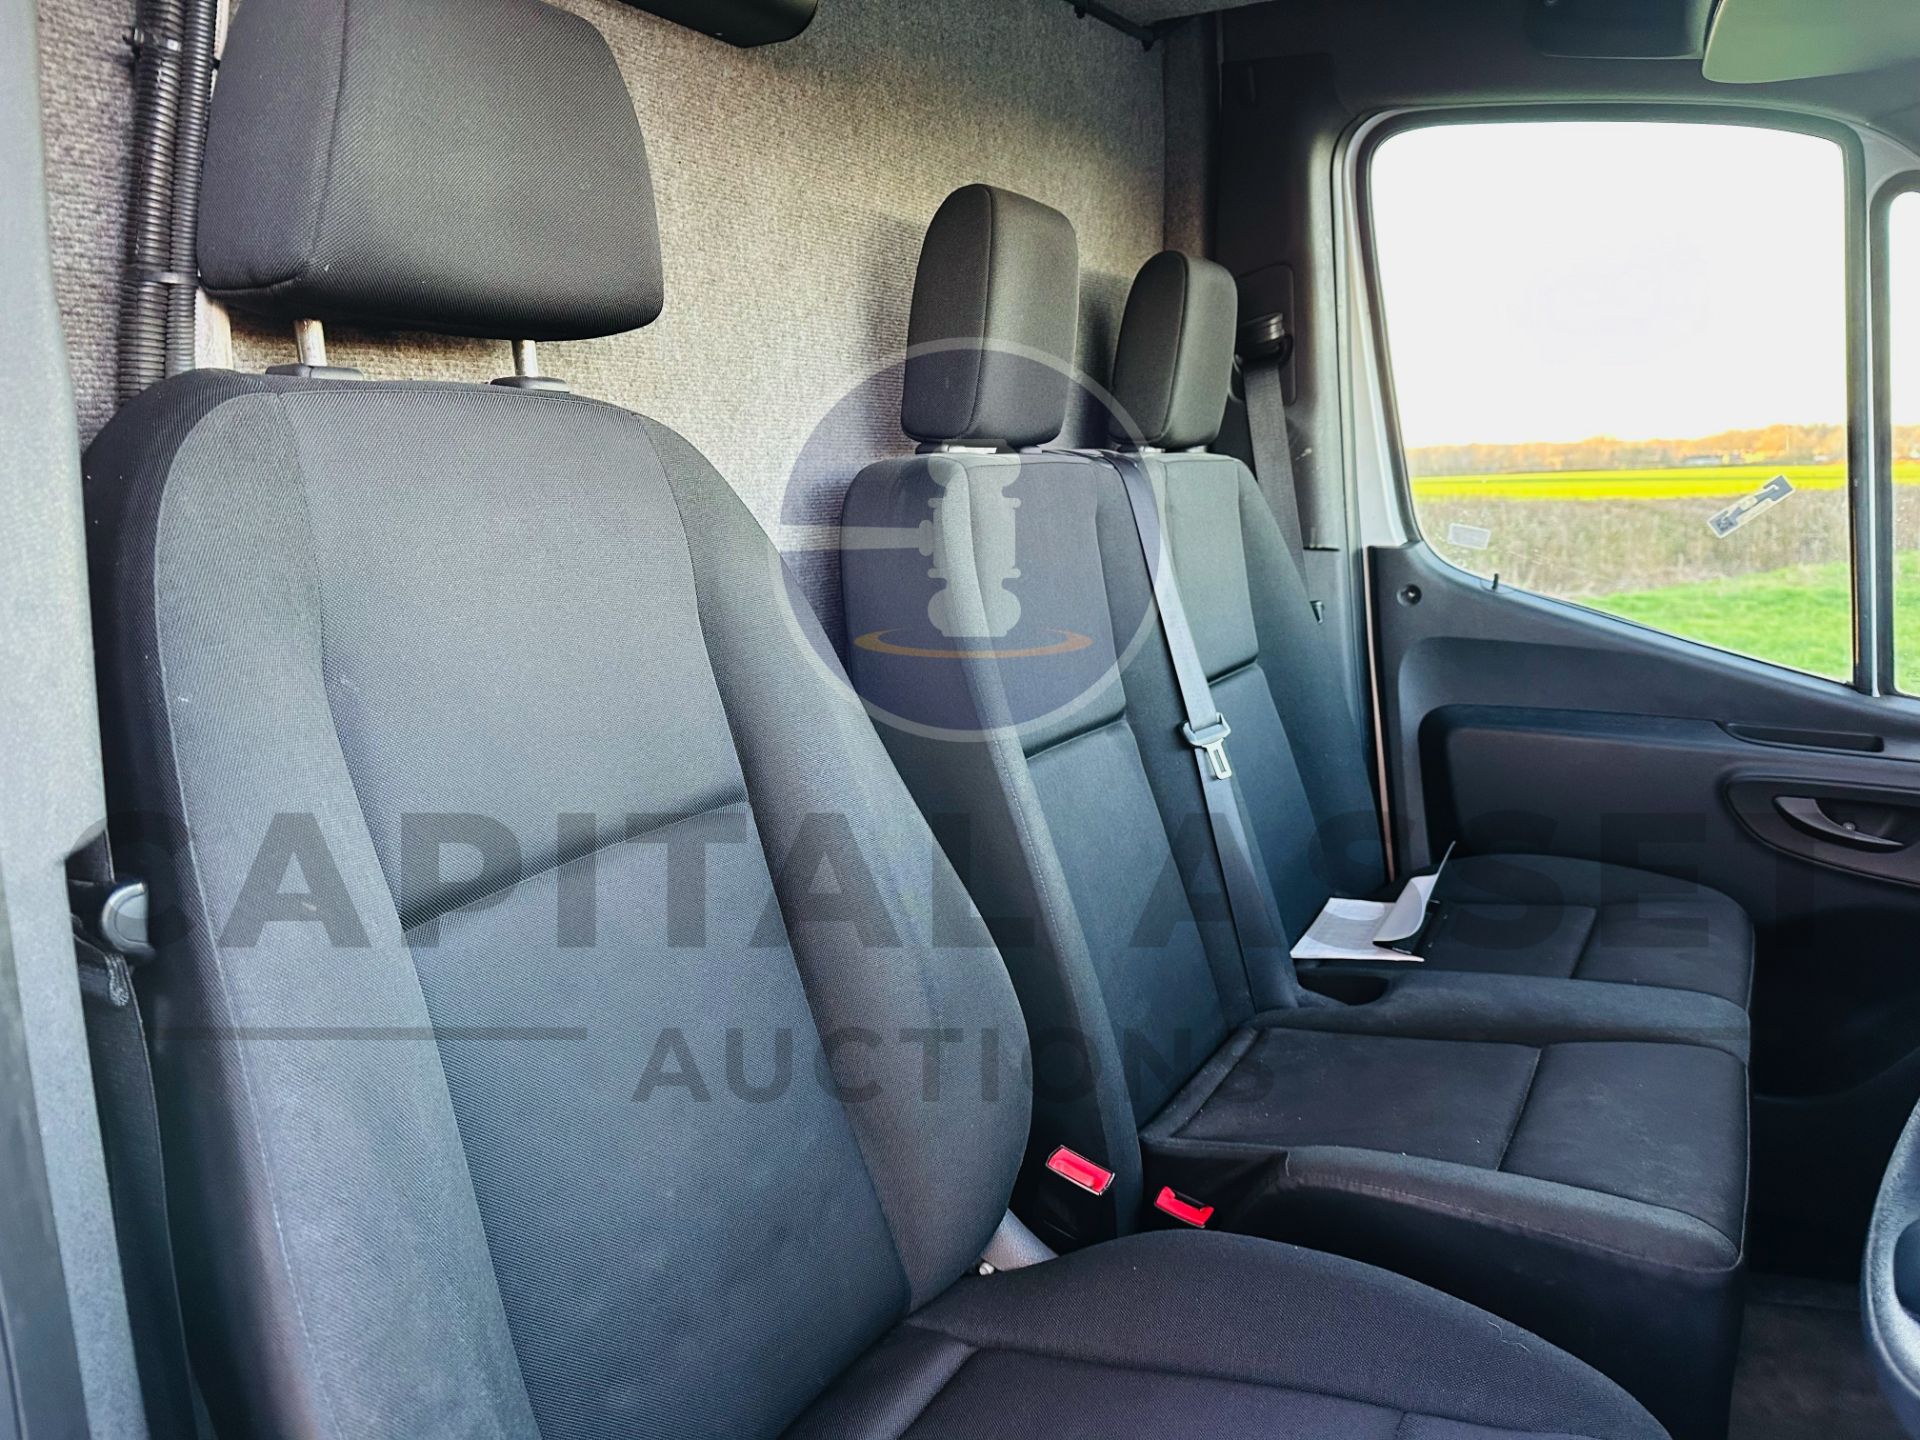 MERCEDES-BENZ SPRINTER 314 CDI *MWB - REFRIGERATED VAN* (2019 - FACELIFT MODEL) *OVERNIGHT STANDBY* - Image 21 of 33